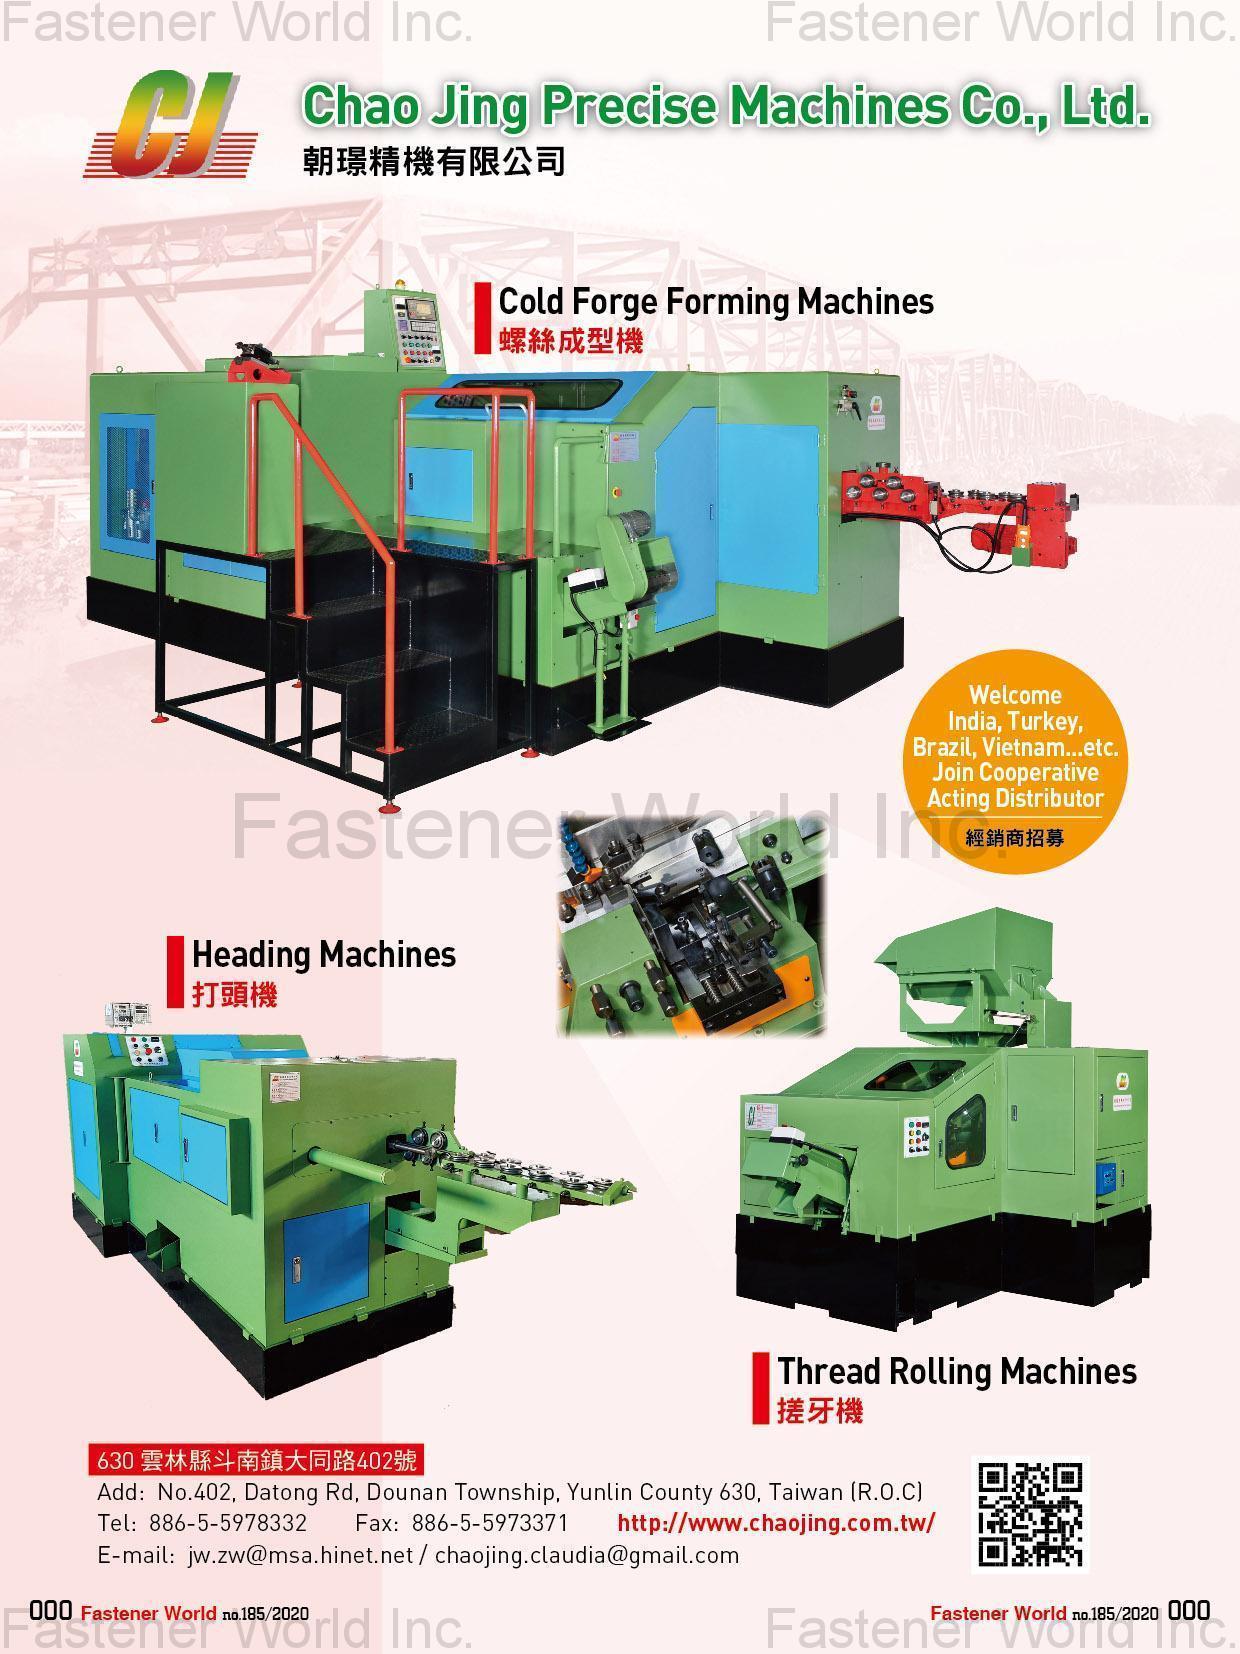 Chao Jing Precise Machines Enterprise Co., Ltd. (San Sing Screw Forming Machines) , Cold Forge Forming Machines, Heading Machines, Thread Rolling Machines